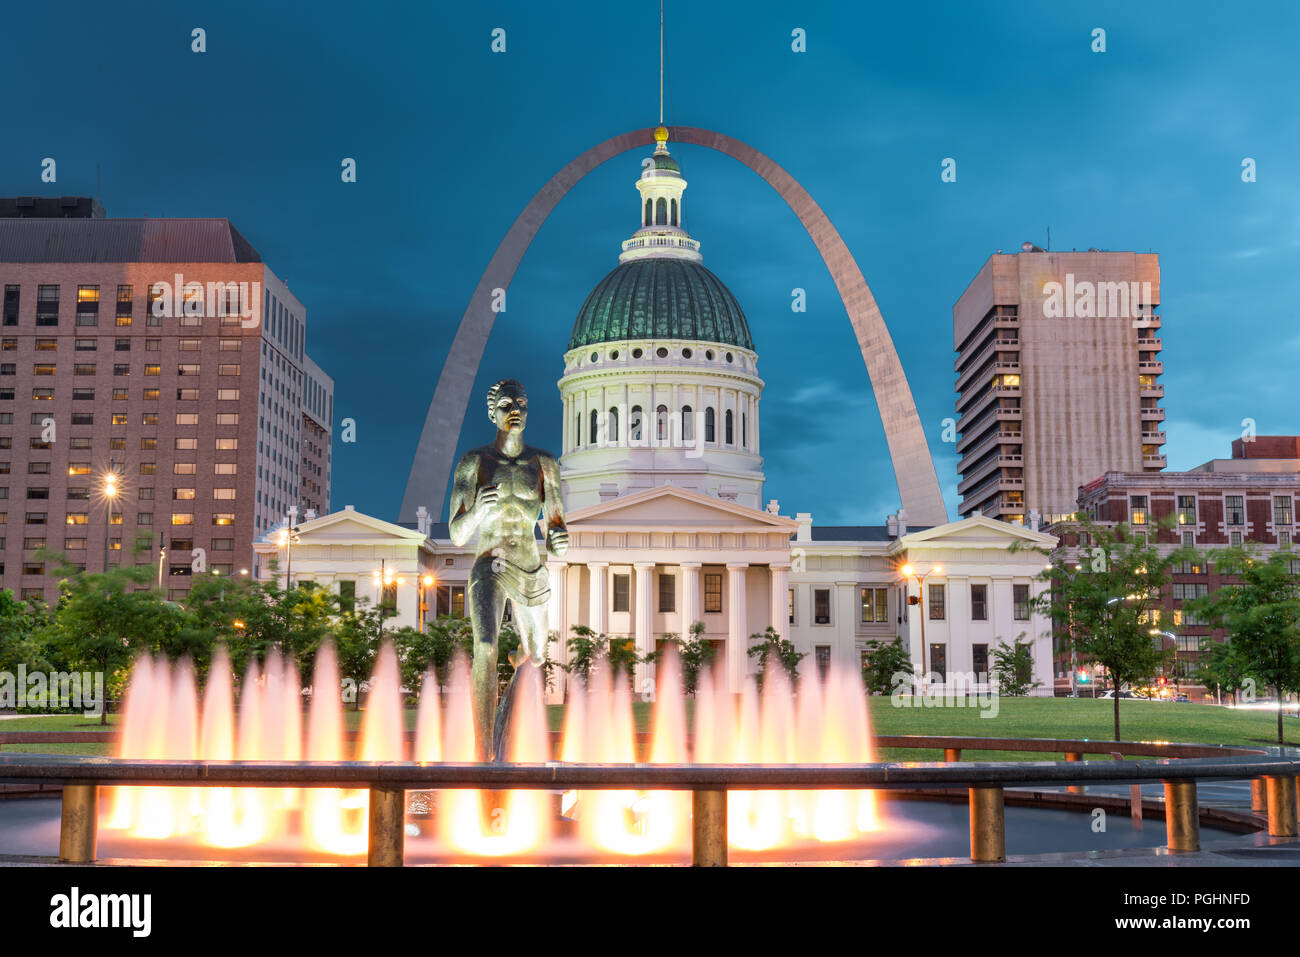 ST LOUIS, MO - JUNE 19, 2018: Fountains surround the runner statue in Kiener Park with the Gateway Arch in the background. Stock Photo